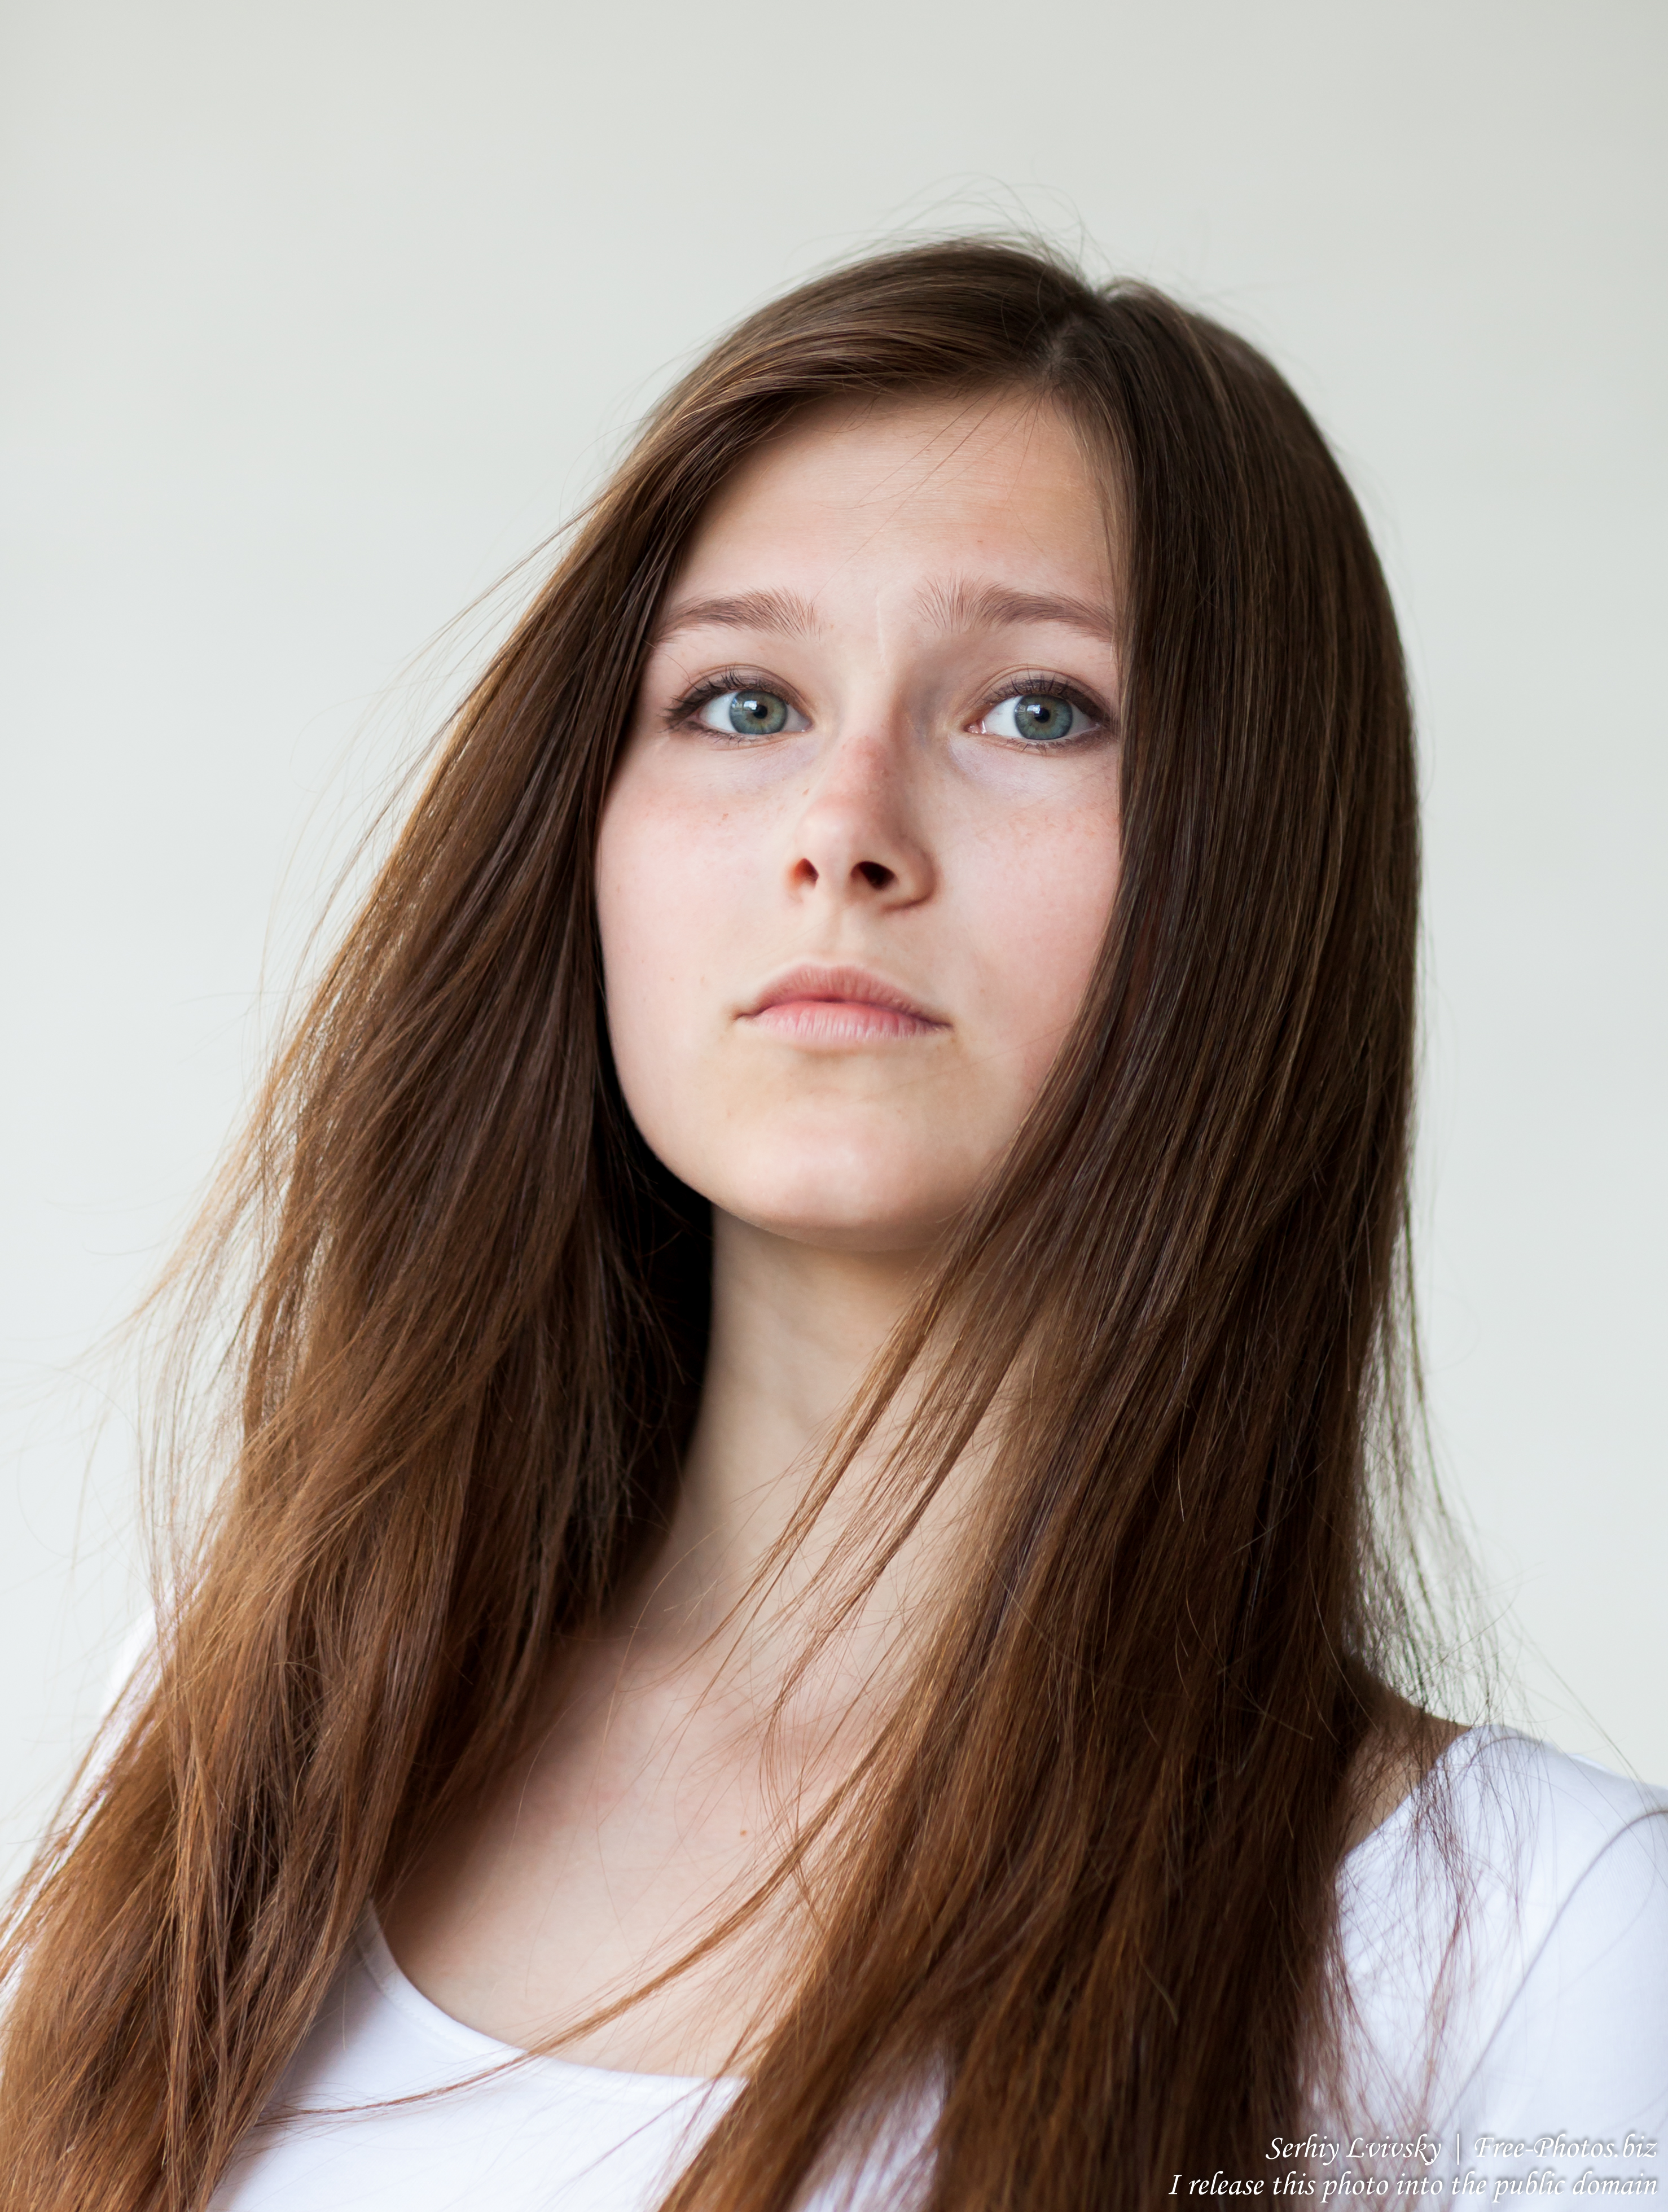 Nastia - a 16-year-old girl photographed in June 2017 by Serhiy Lvivsky, picture 1